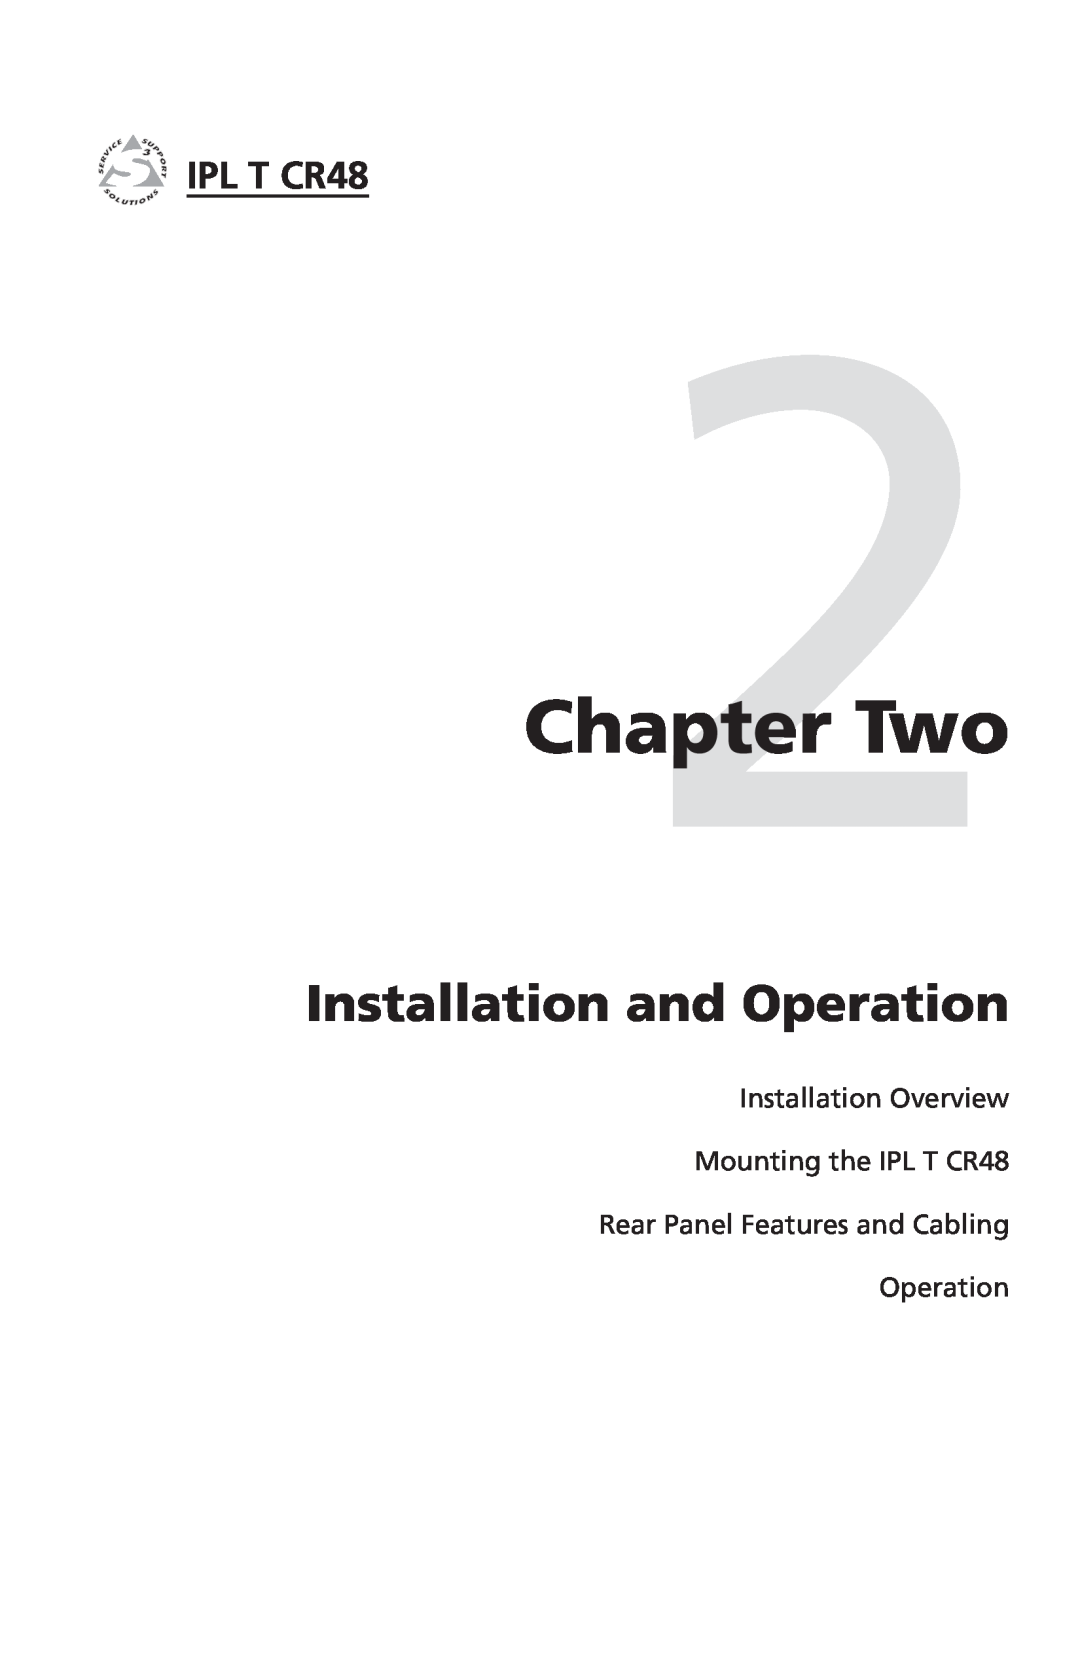 Extron electronic manual Two, Installation and Operation, Installation Overview Mounting the IPL T CR48 